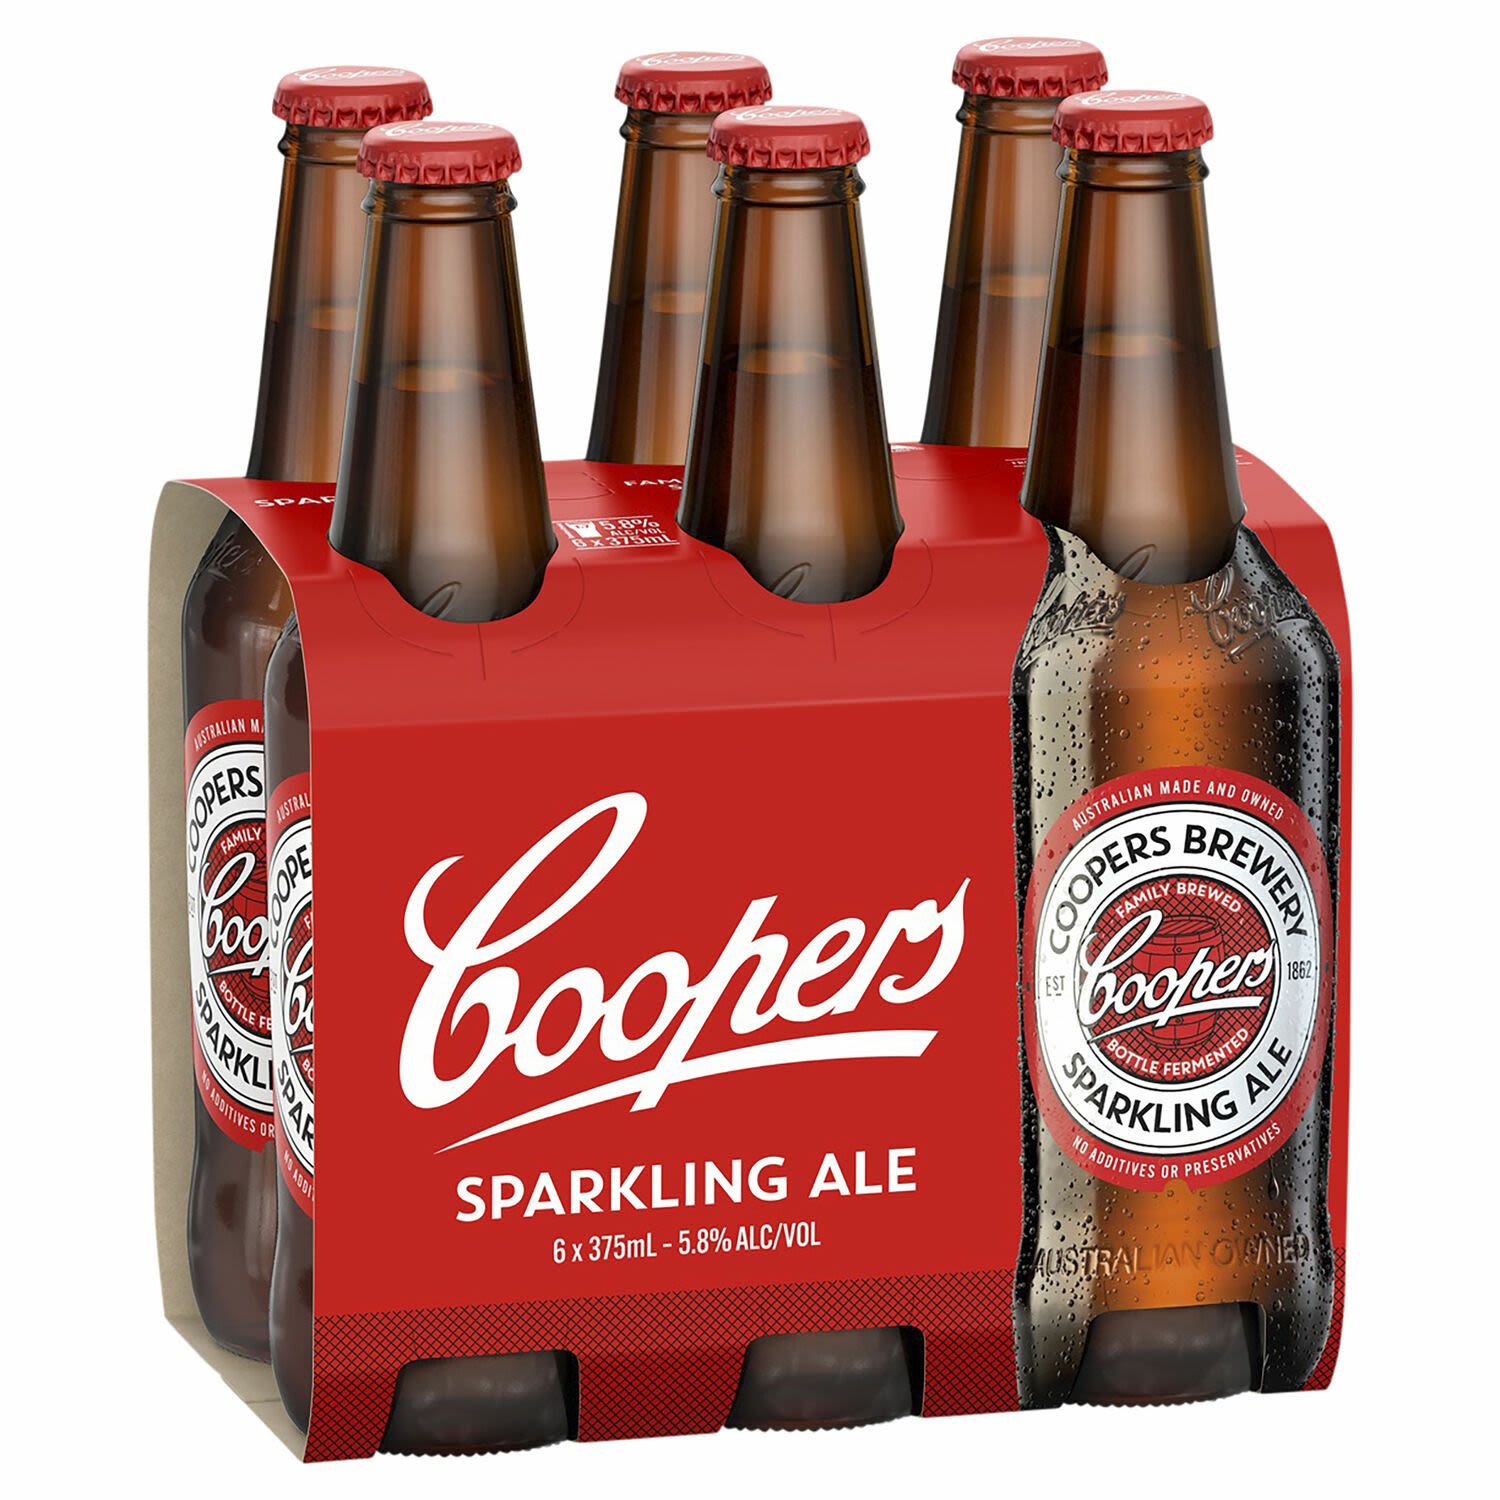 Coopers Sparkling Ale Bottle 375mL 6 Pack